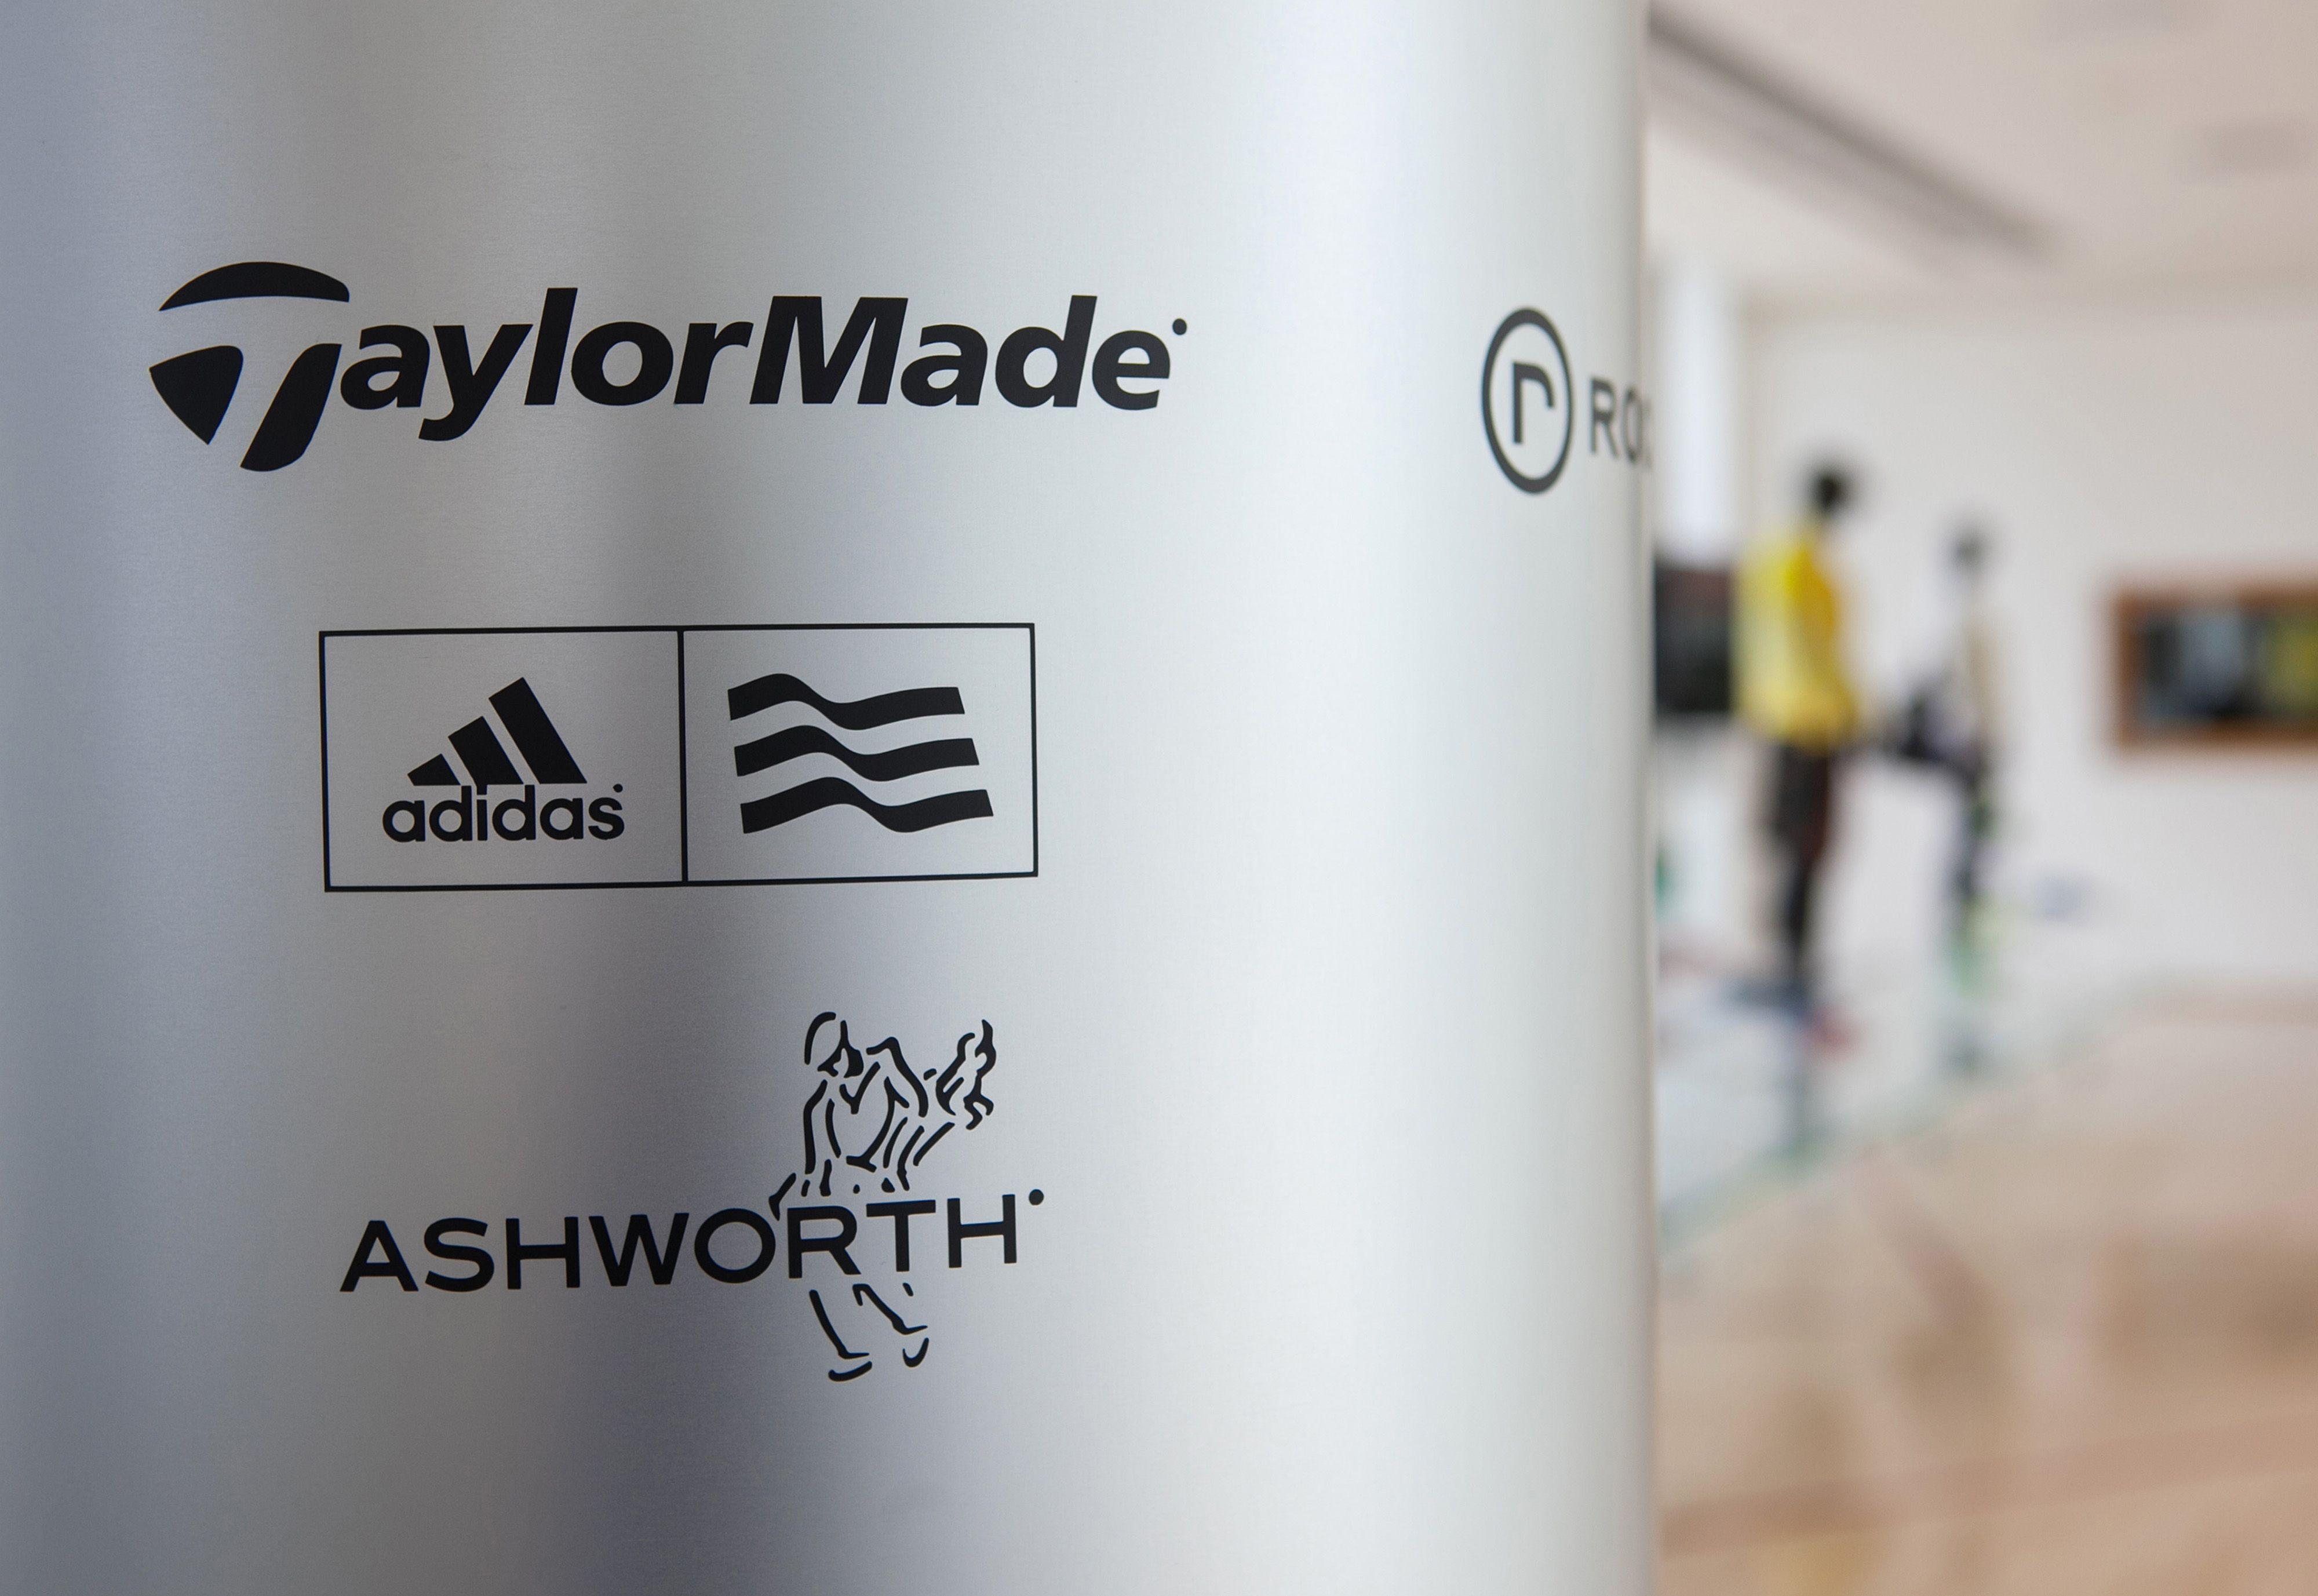 TaylorMade-adidas Logo - Adidas Golf Unit May Be Up For Sale | Fortune